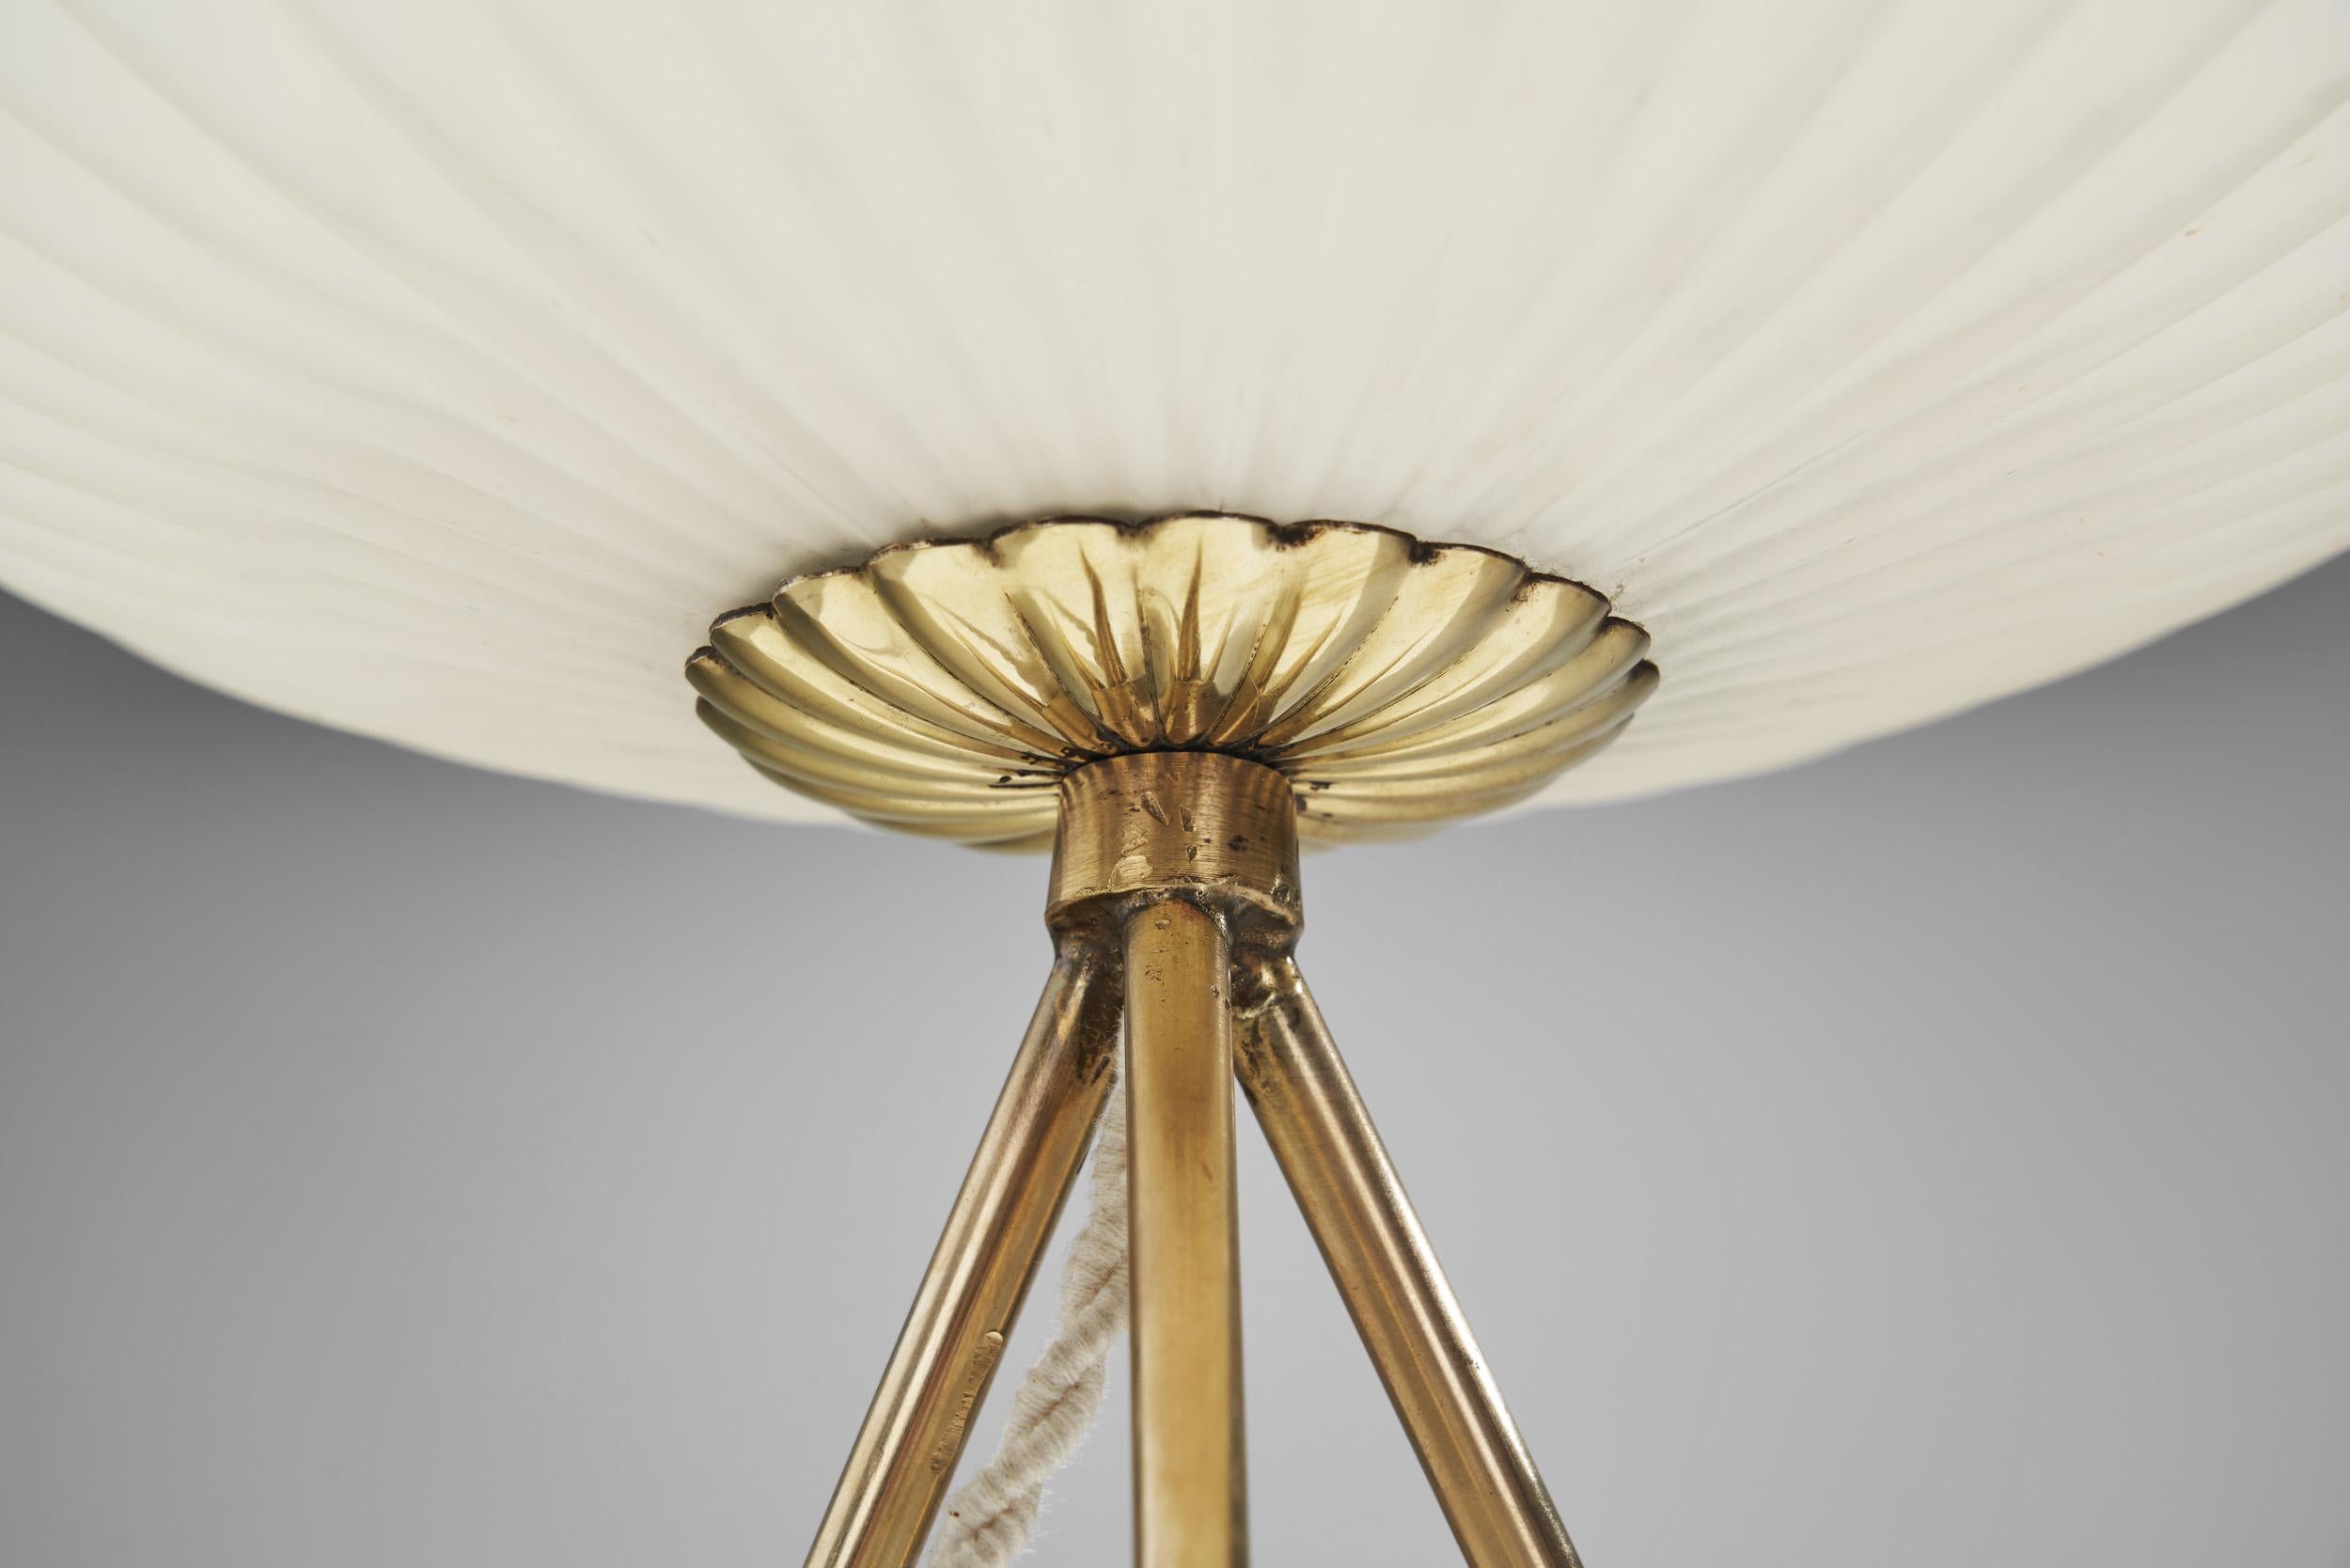 European Modern Tripod Table Lamp with Opal Glass Shade, Europe 1960s For Sale 7